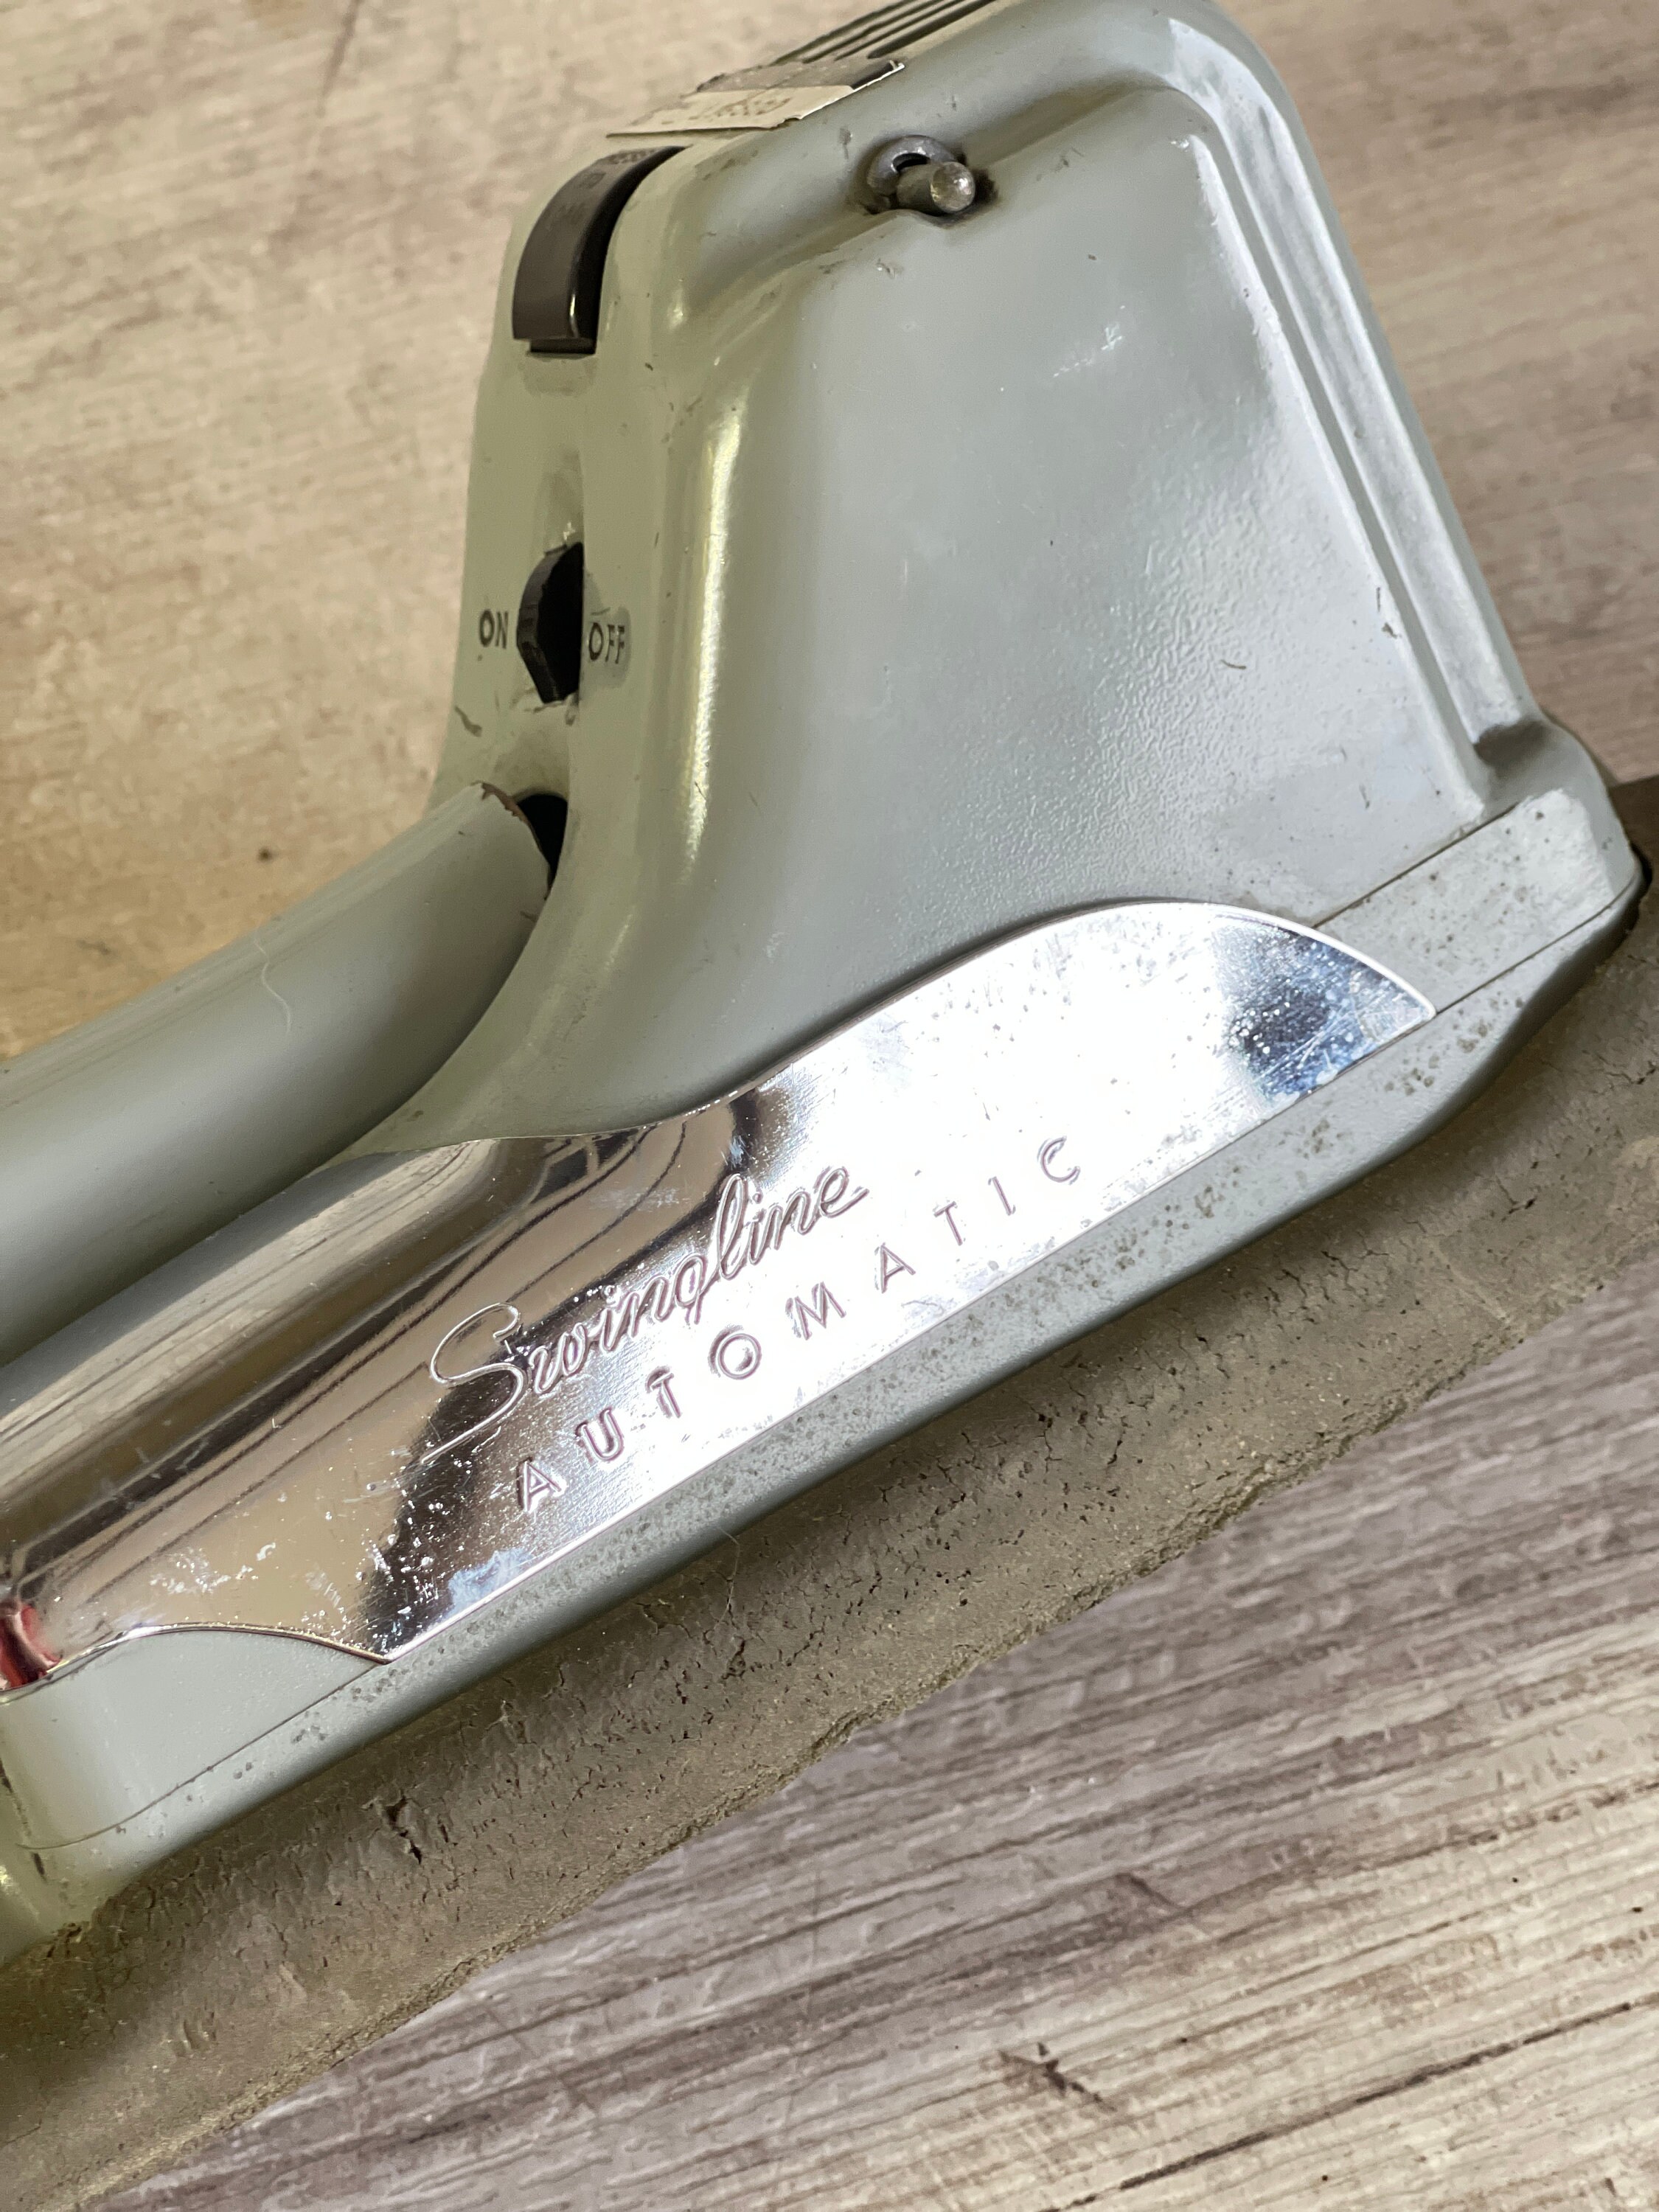 Vintage Stapler Automatic Electric Swingline industrial 1950s Model 66-A  Serial No. 119800 